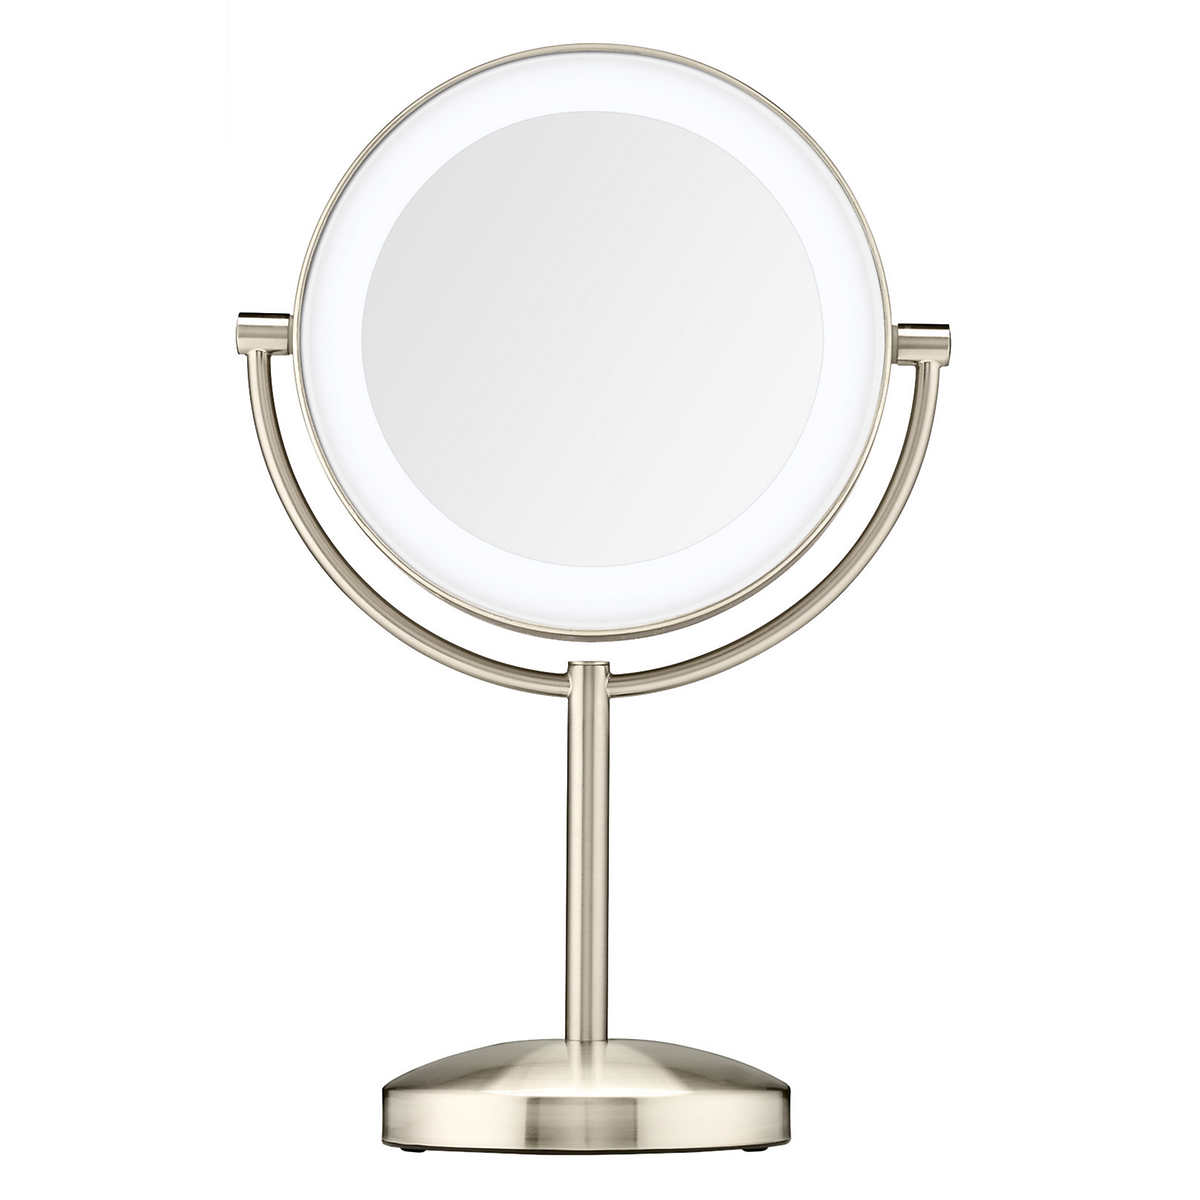 Reflections Led Lighted Mirror By, Conair Reflections Double Sided Led Lighted Vanity Makeup Mirror